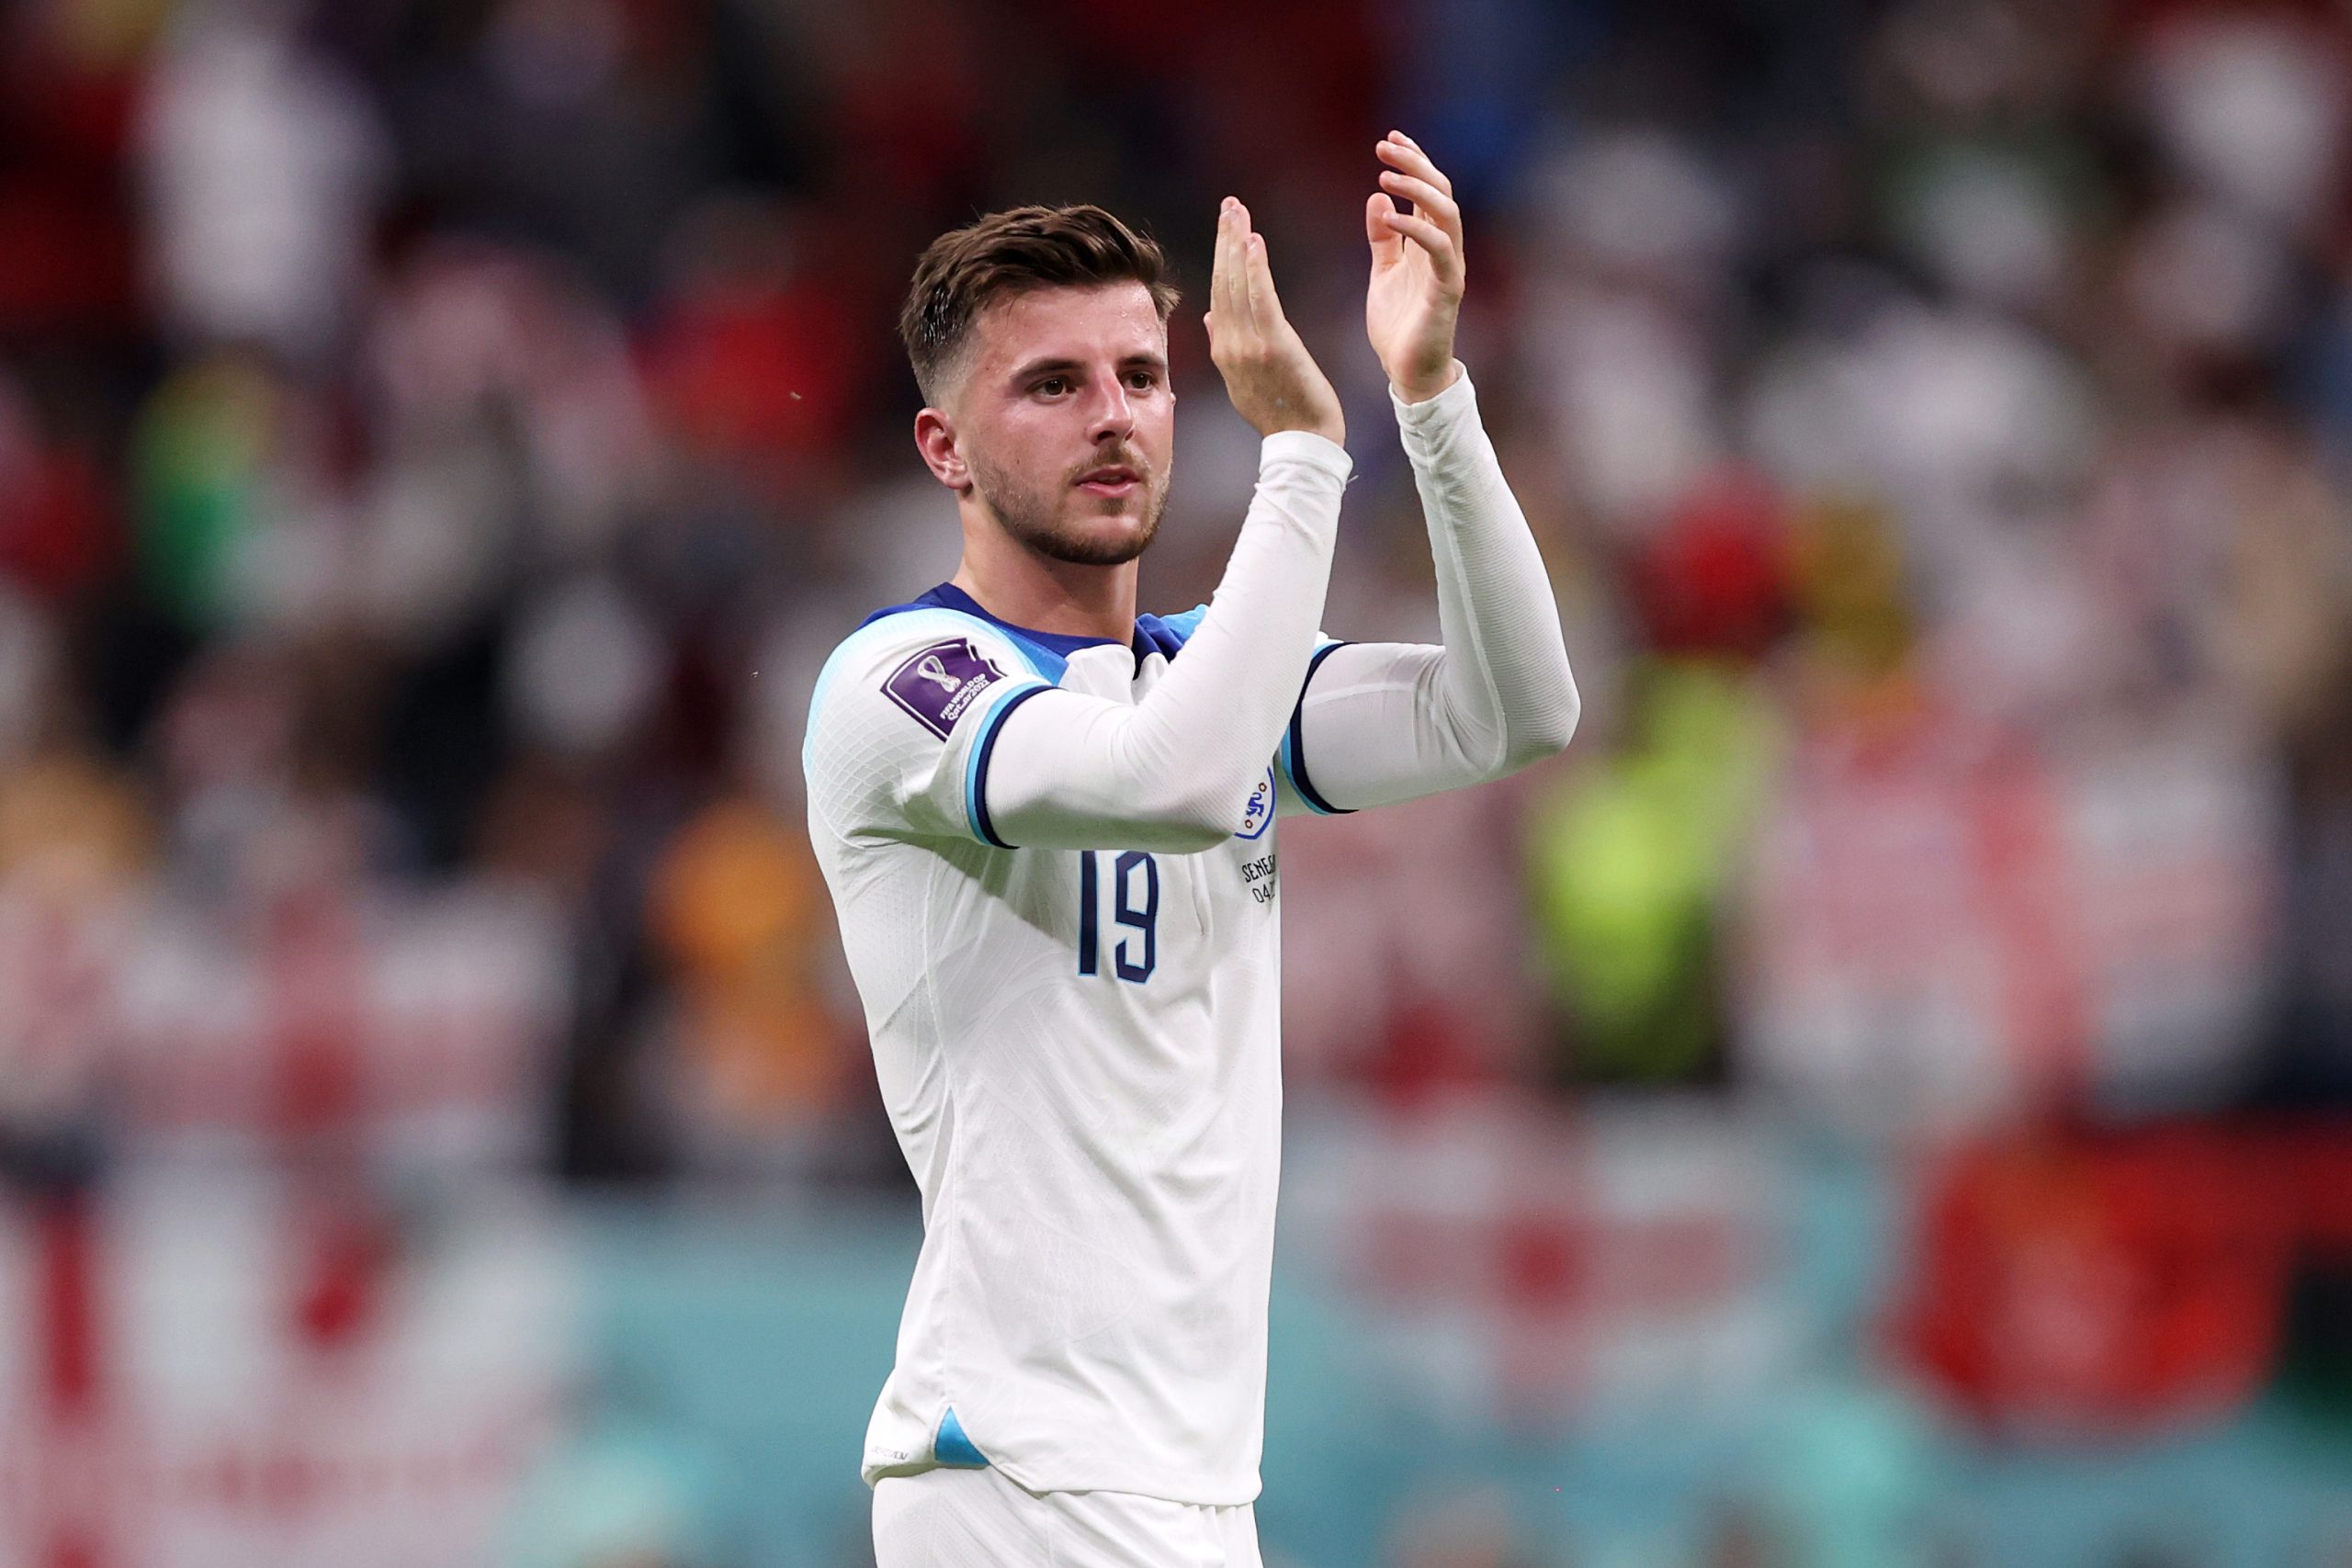 Chelsea unwilling to lower their £75 million valuation of Mason Mount.